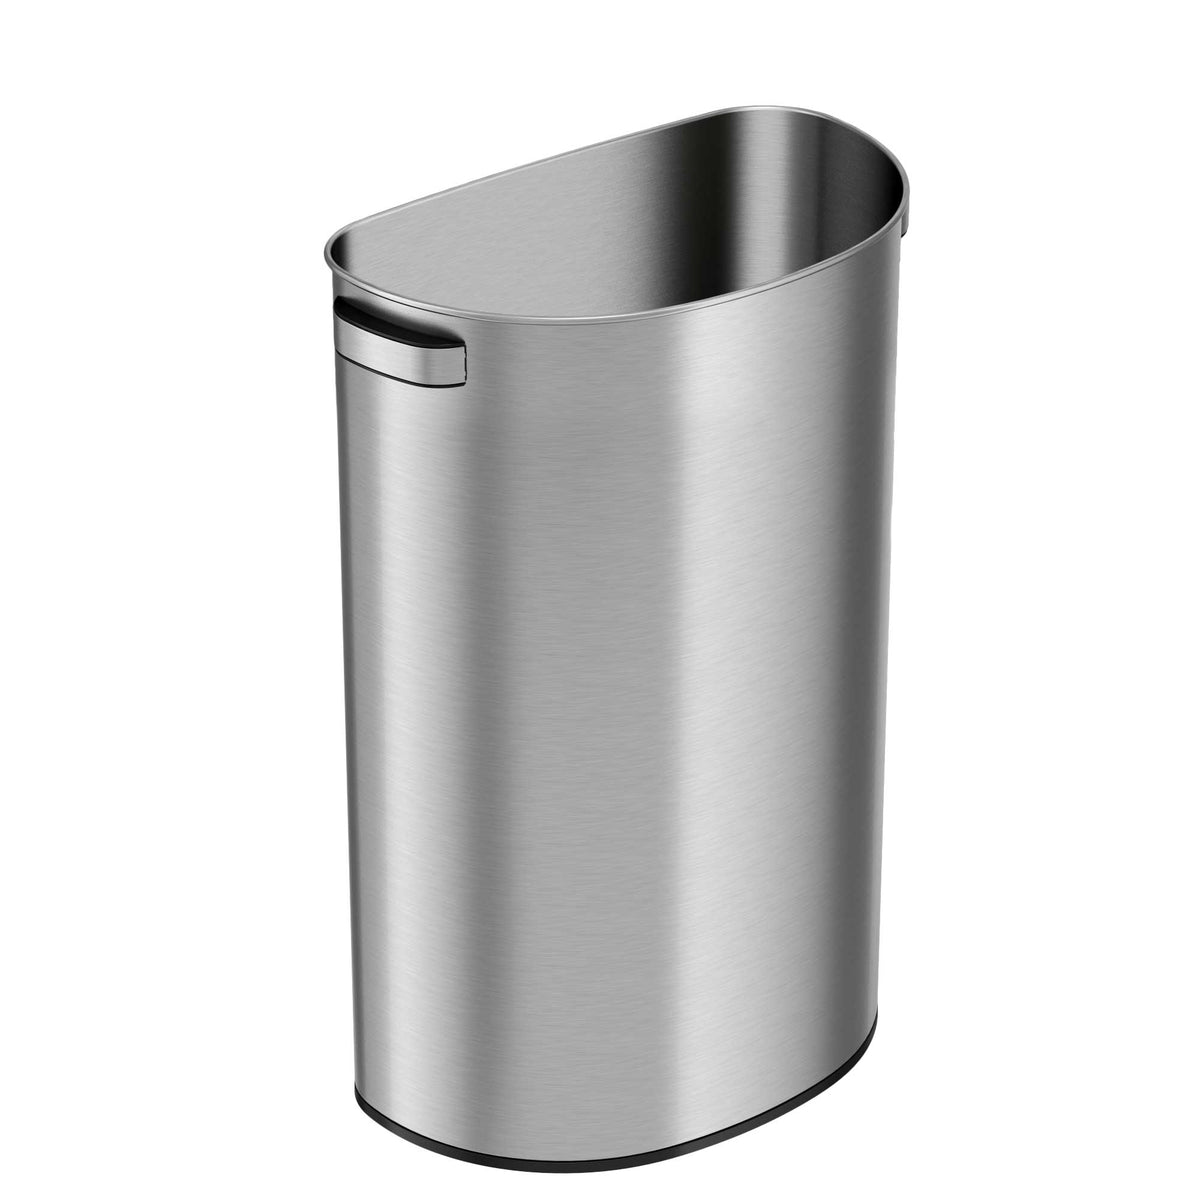 Trash Can Body of IT23DOT